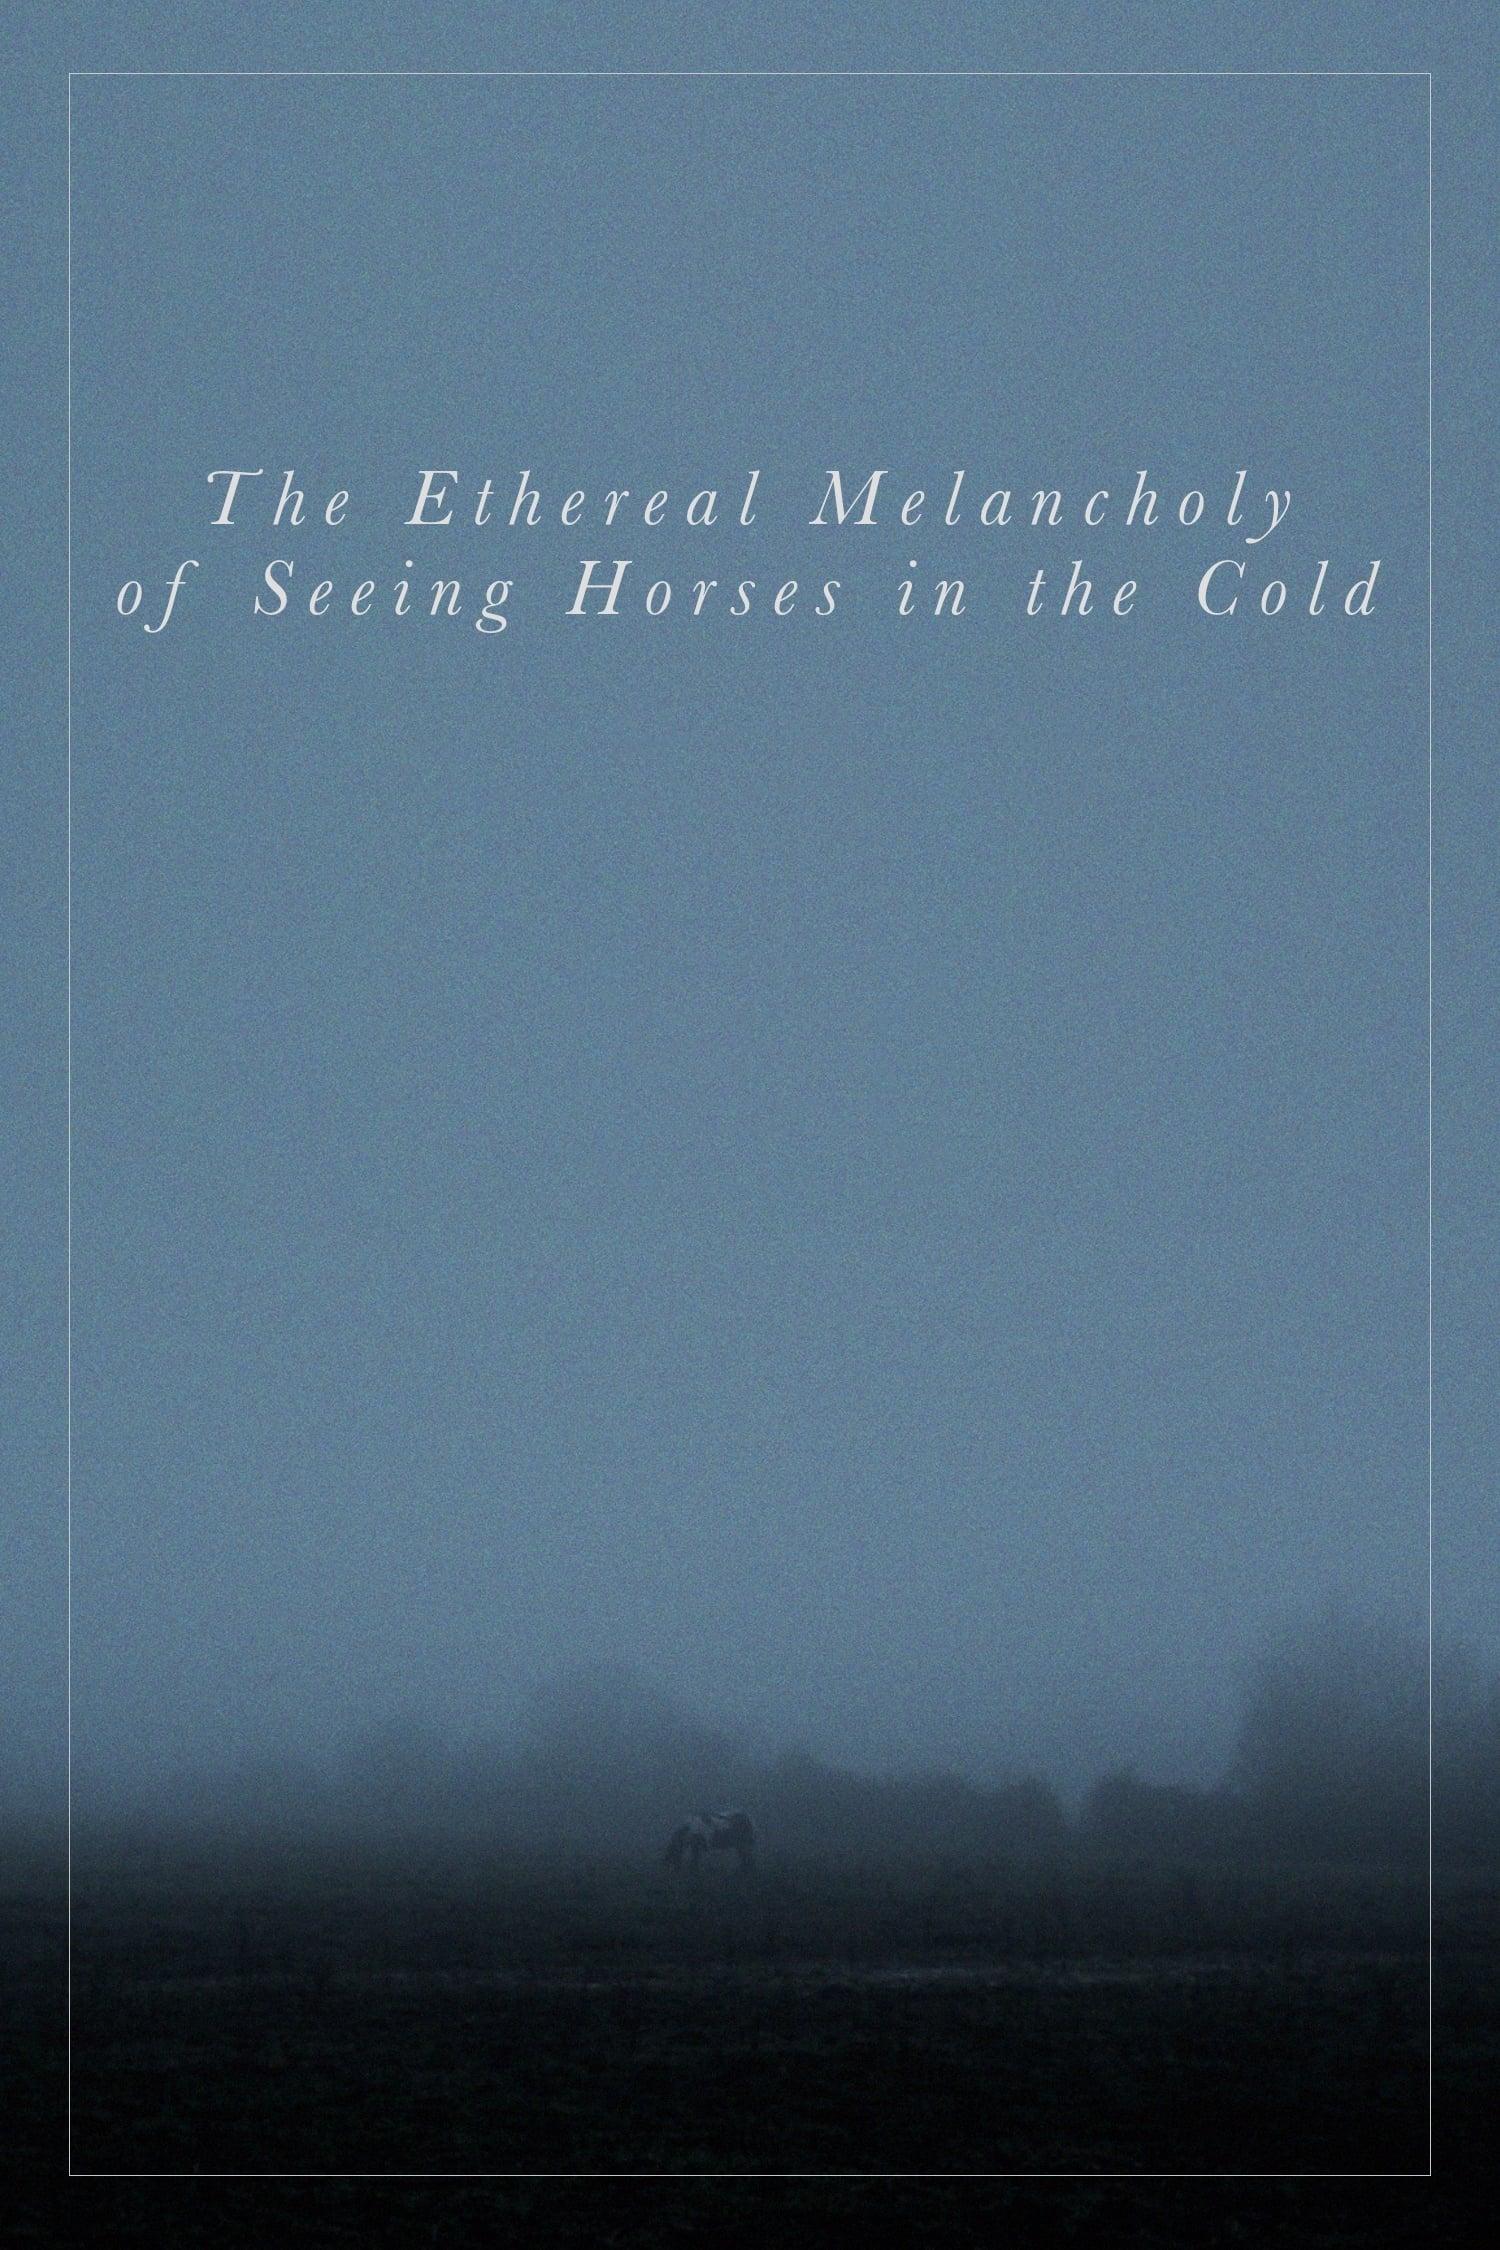 The Ethereal Melancholy of Seeing Horses in the Cold poster